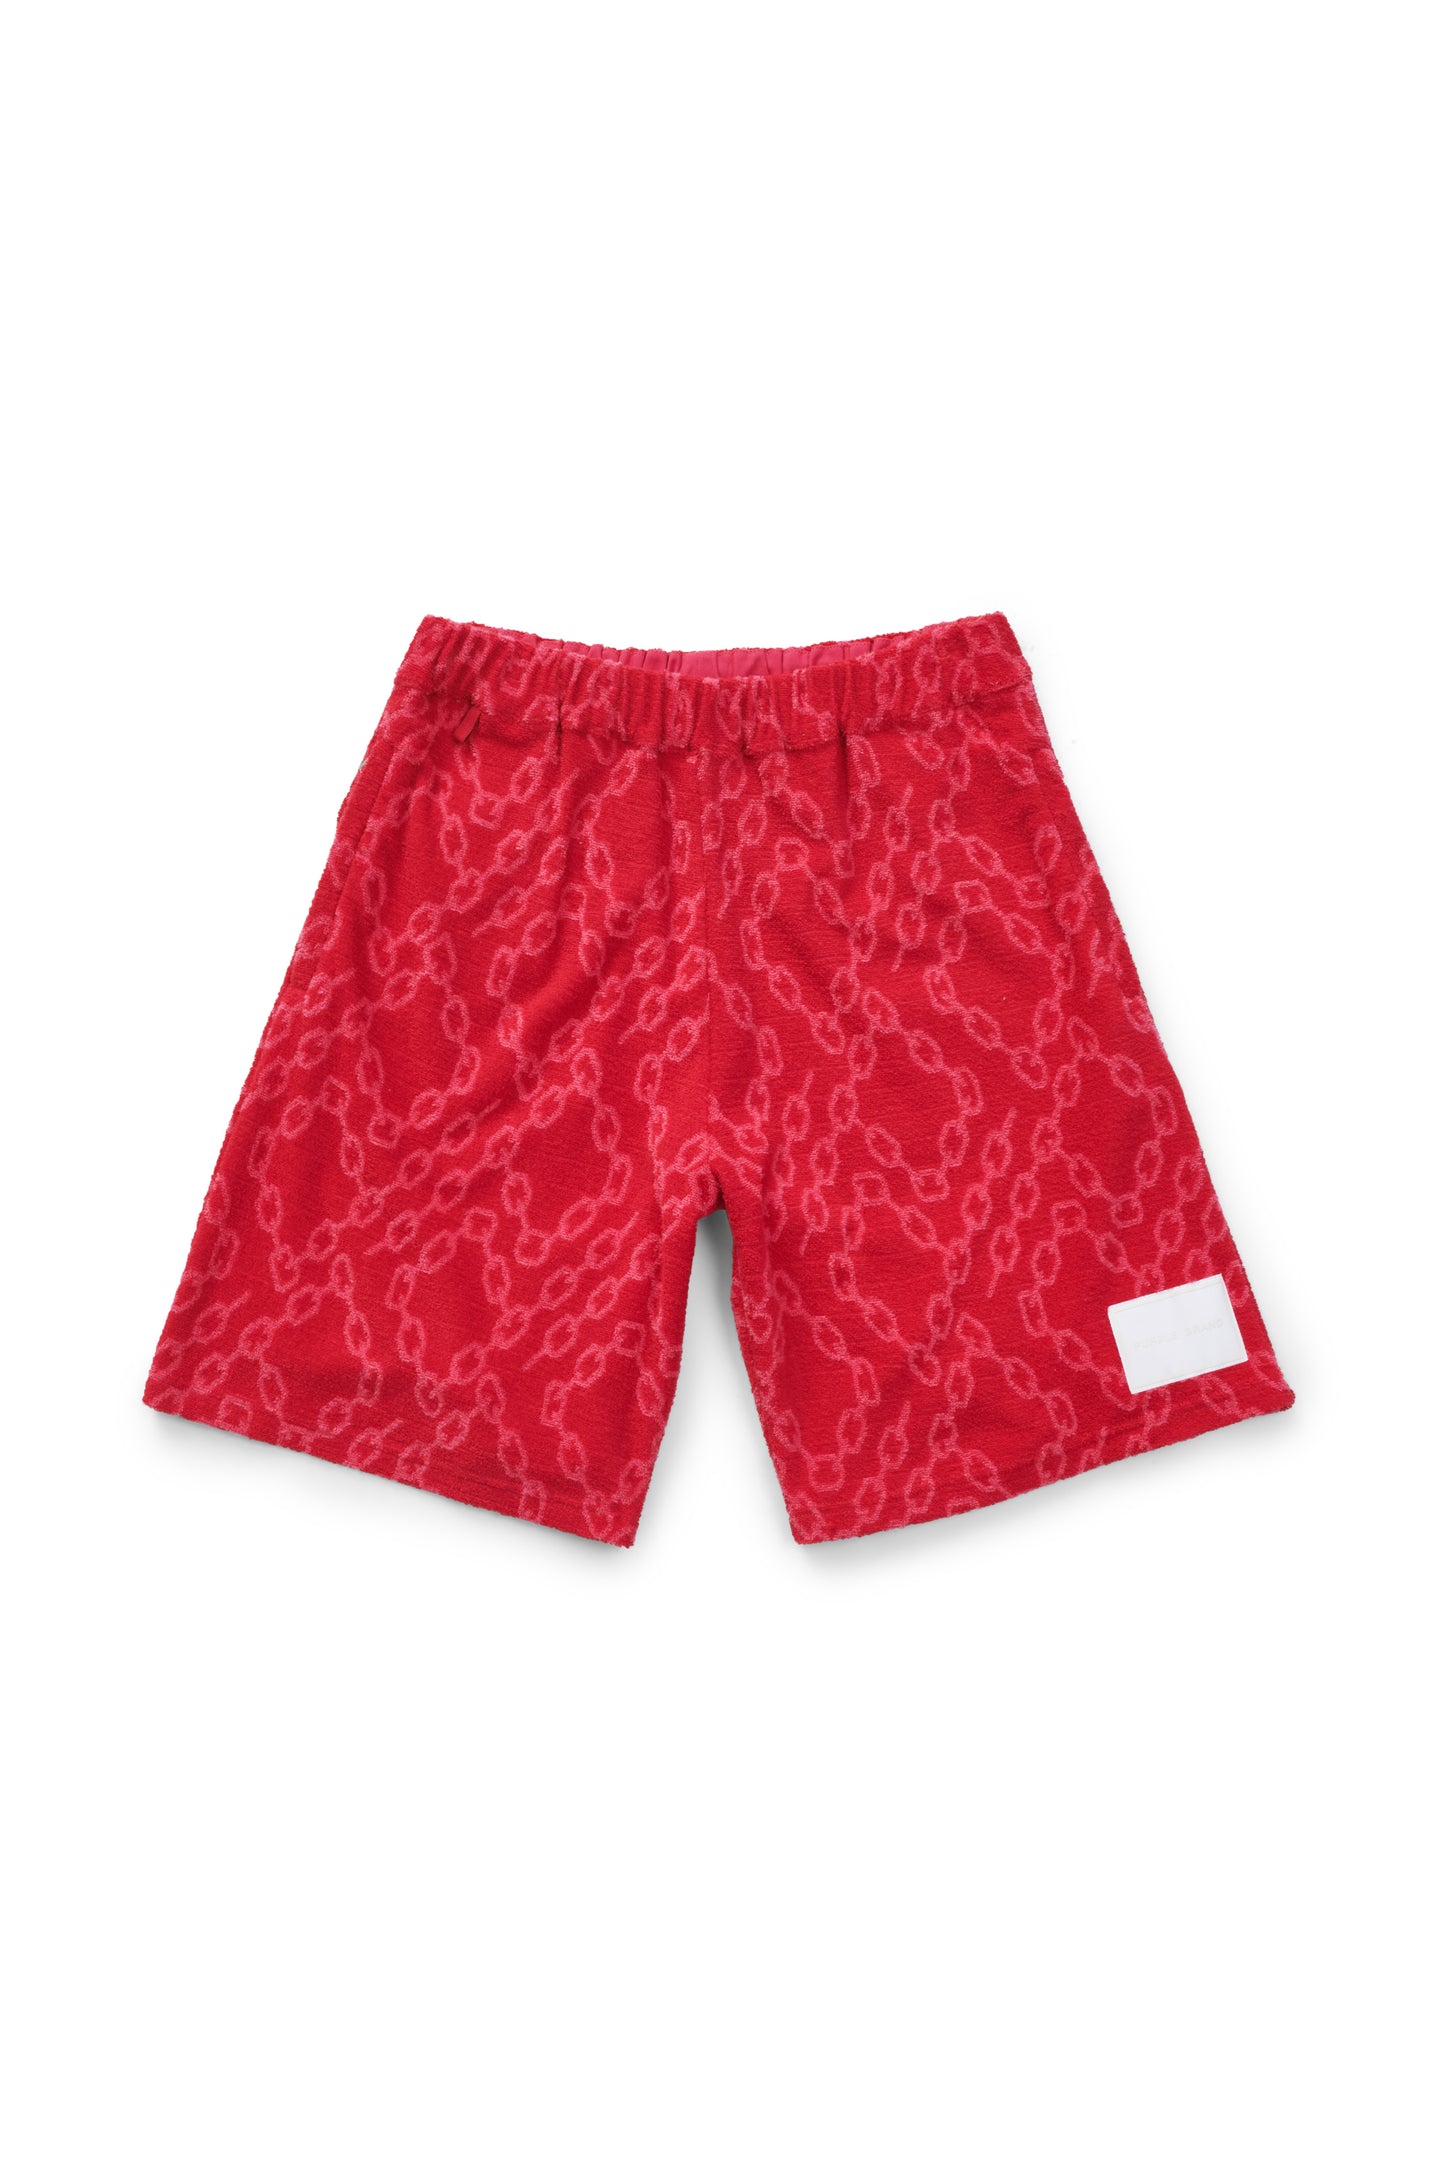 P419 TERRY TOWEL SHORT - Fiery Red